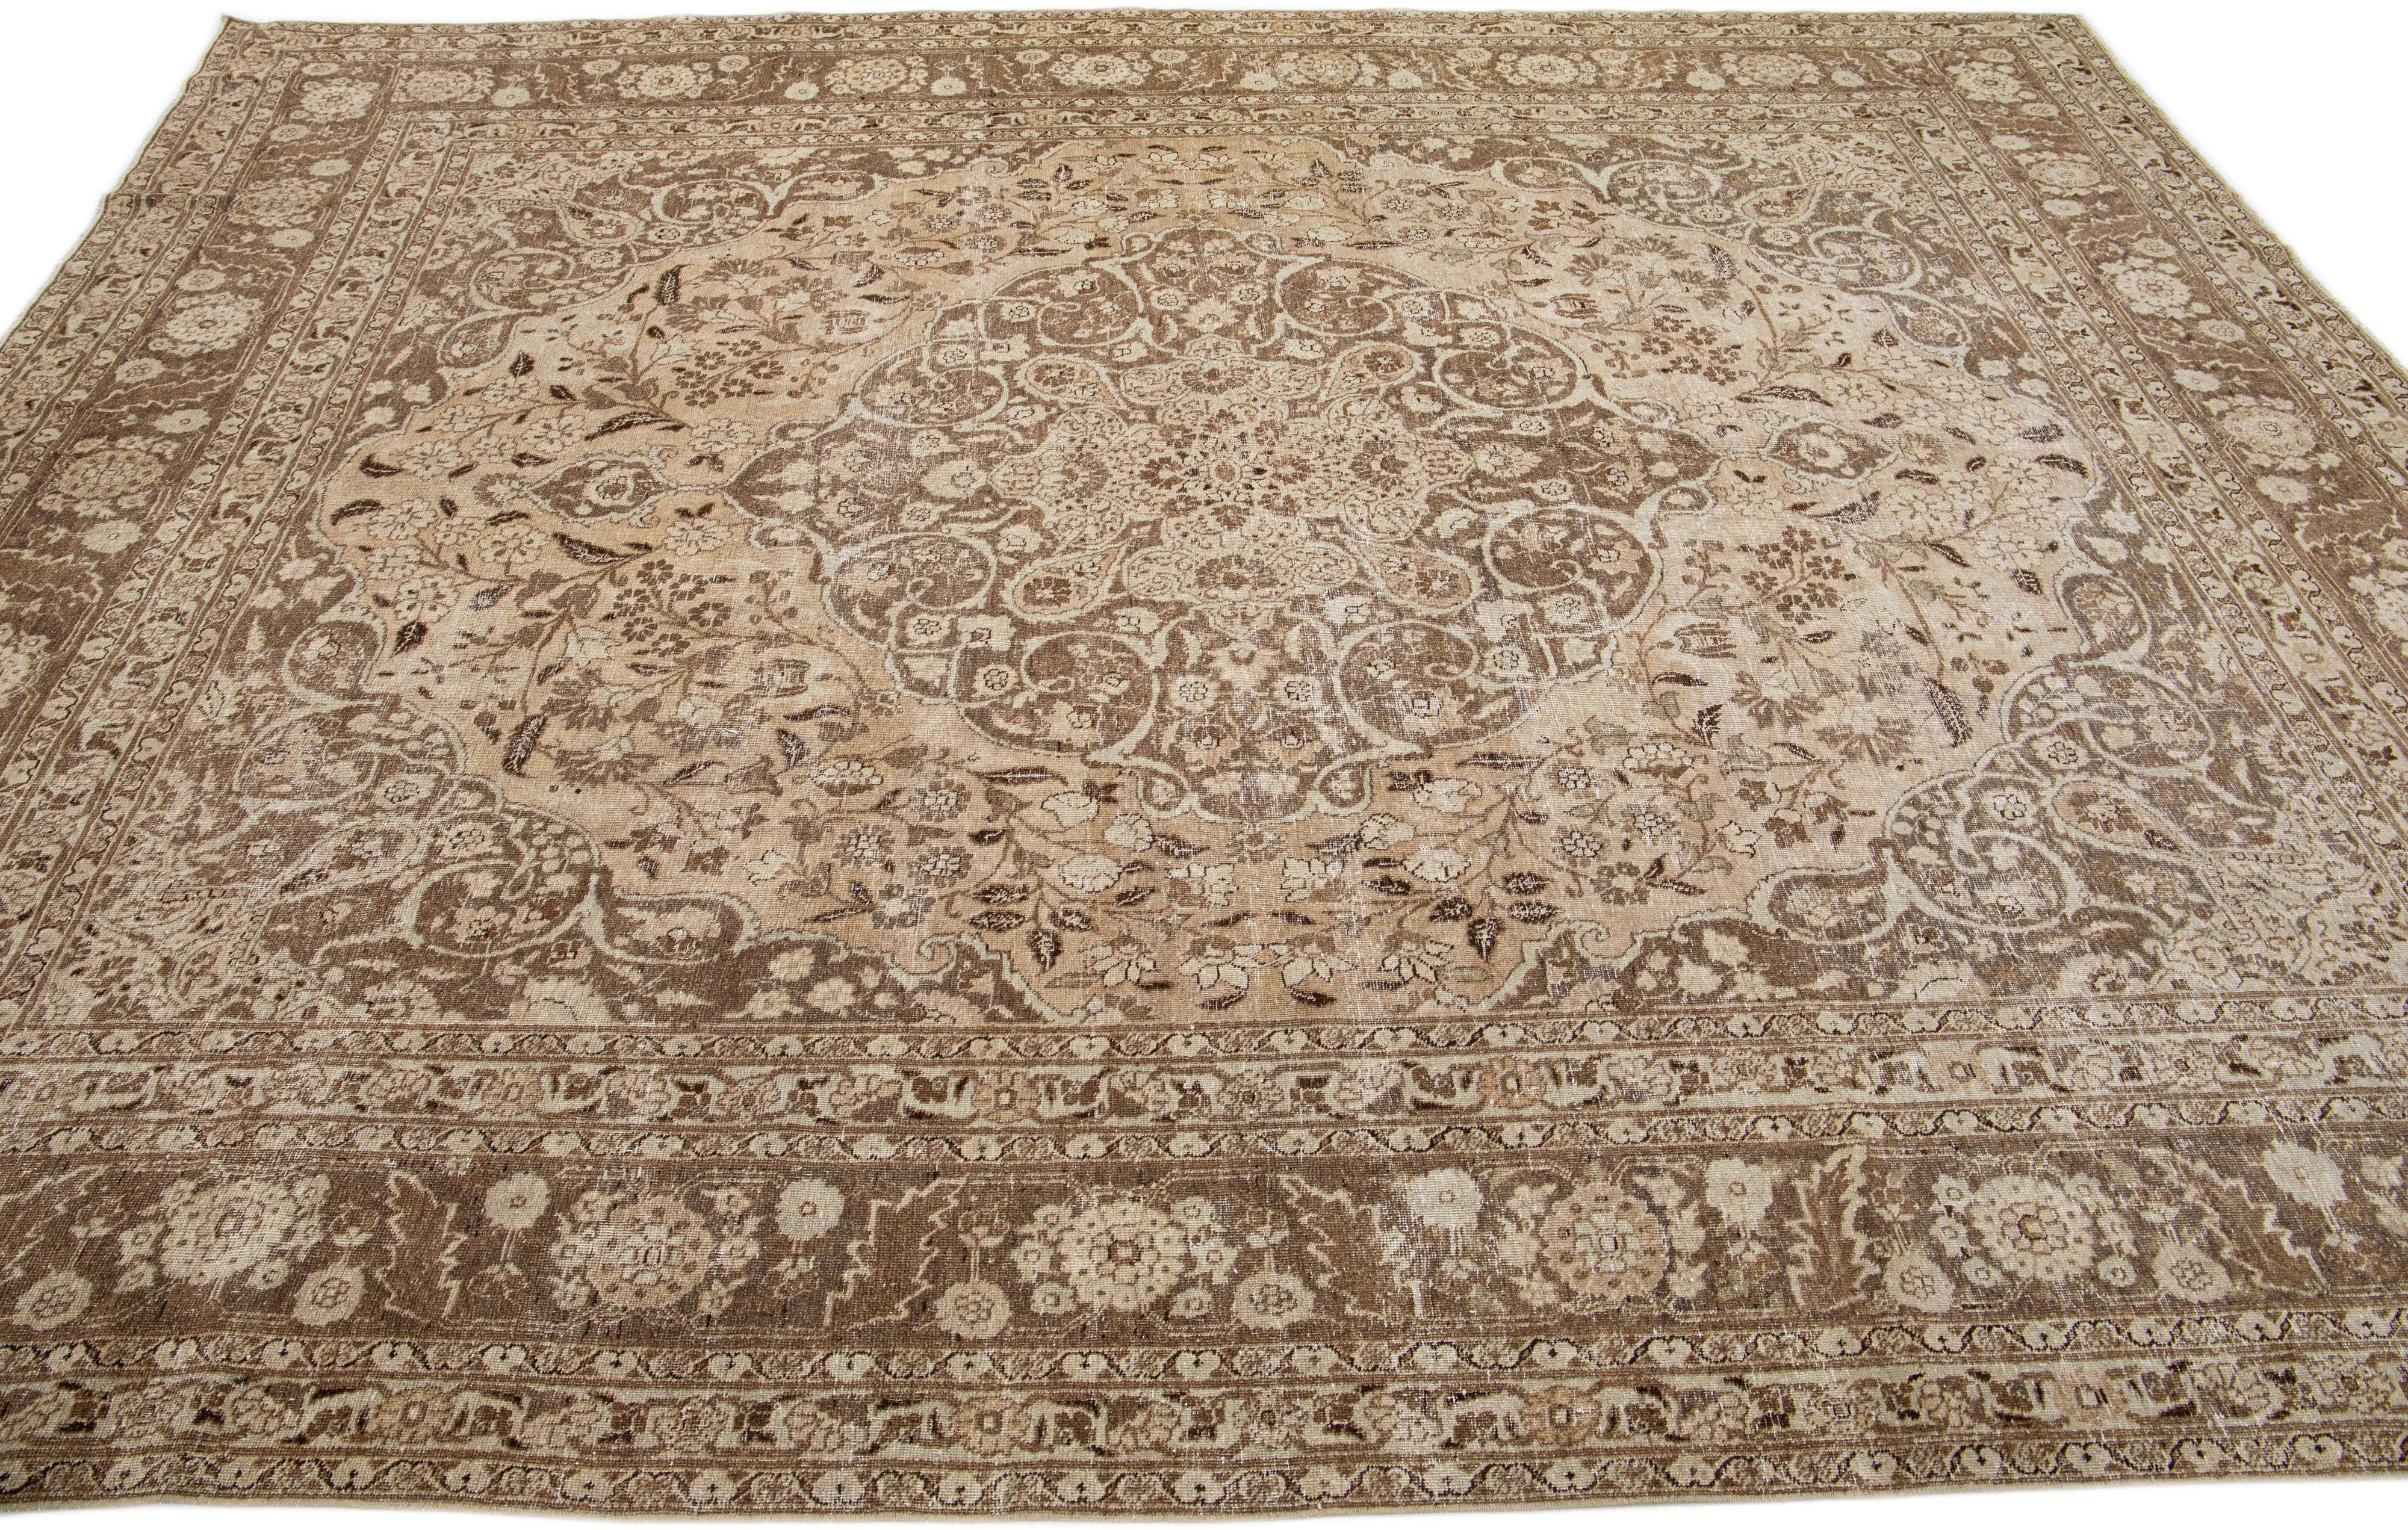 Brown 1920s Antique Persian Tabriz Handmade Wool Rug with Medallion Design In Good Condition For Sale In Norwalk, CT